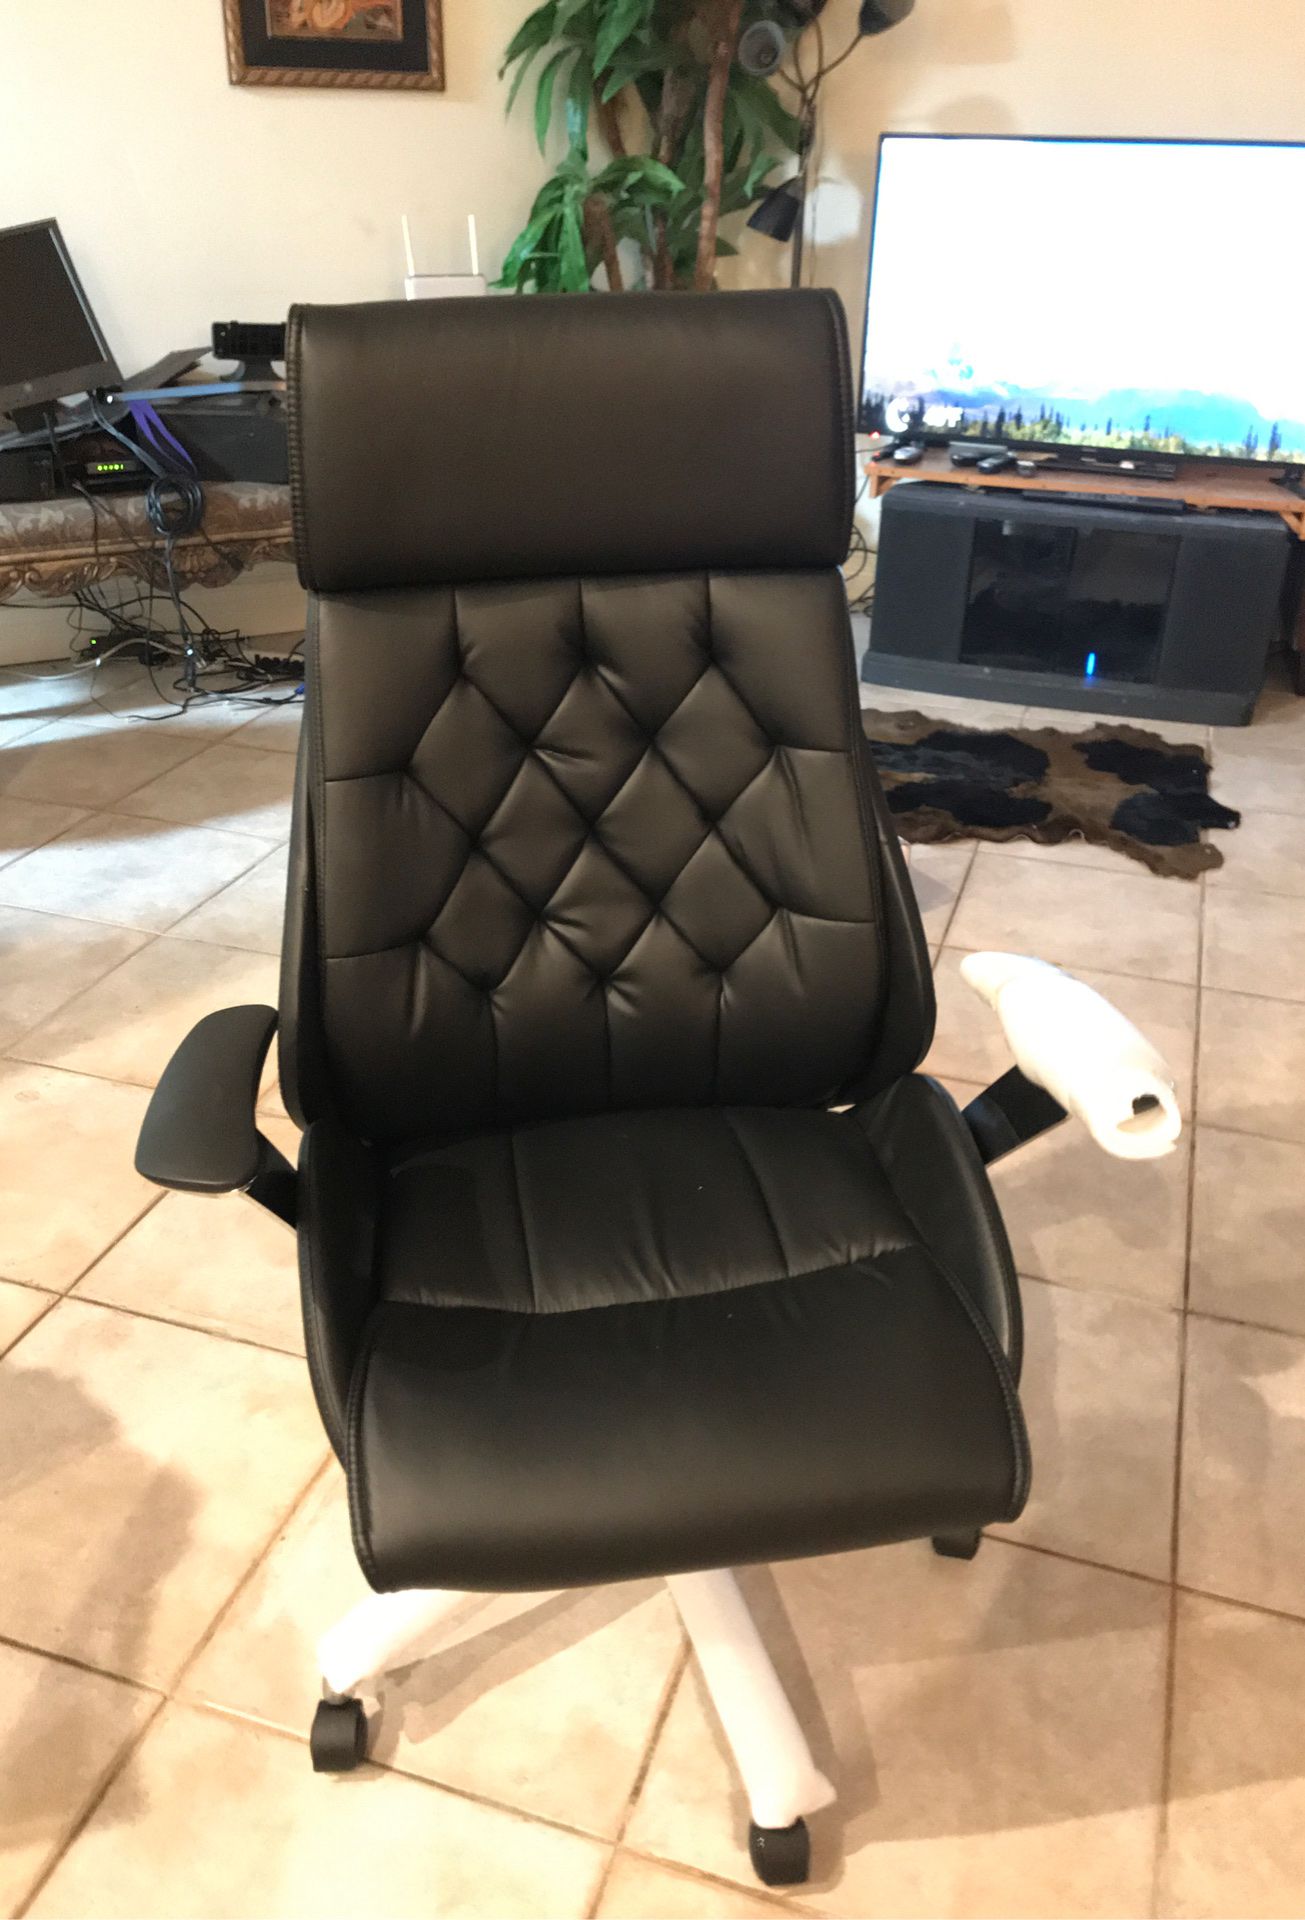 $429 retail ZUMO office chair Most comfortable most beautiful design sold out online check Office Depot for the price with proof of purchase $429.98